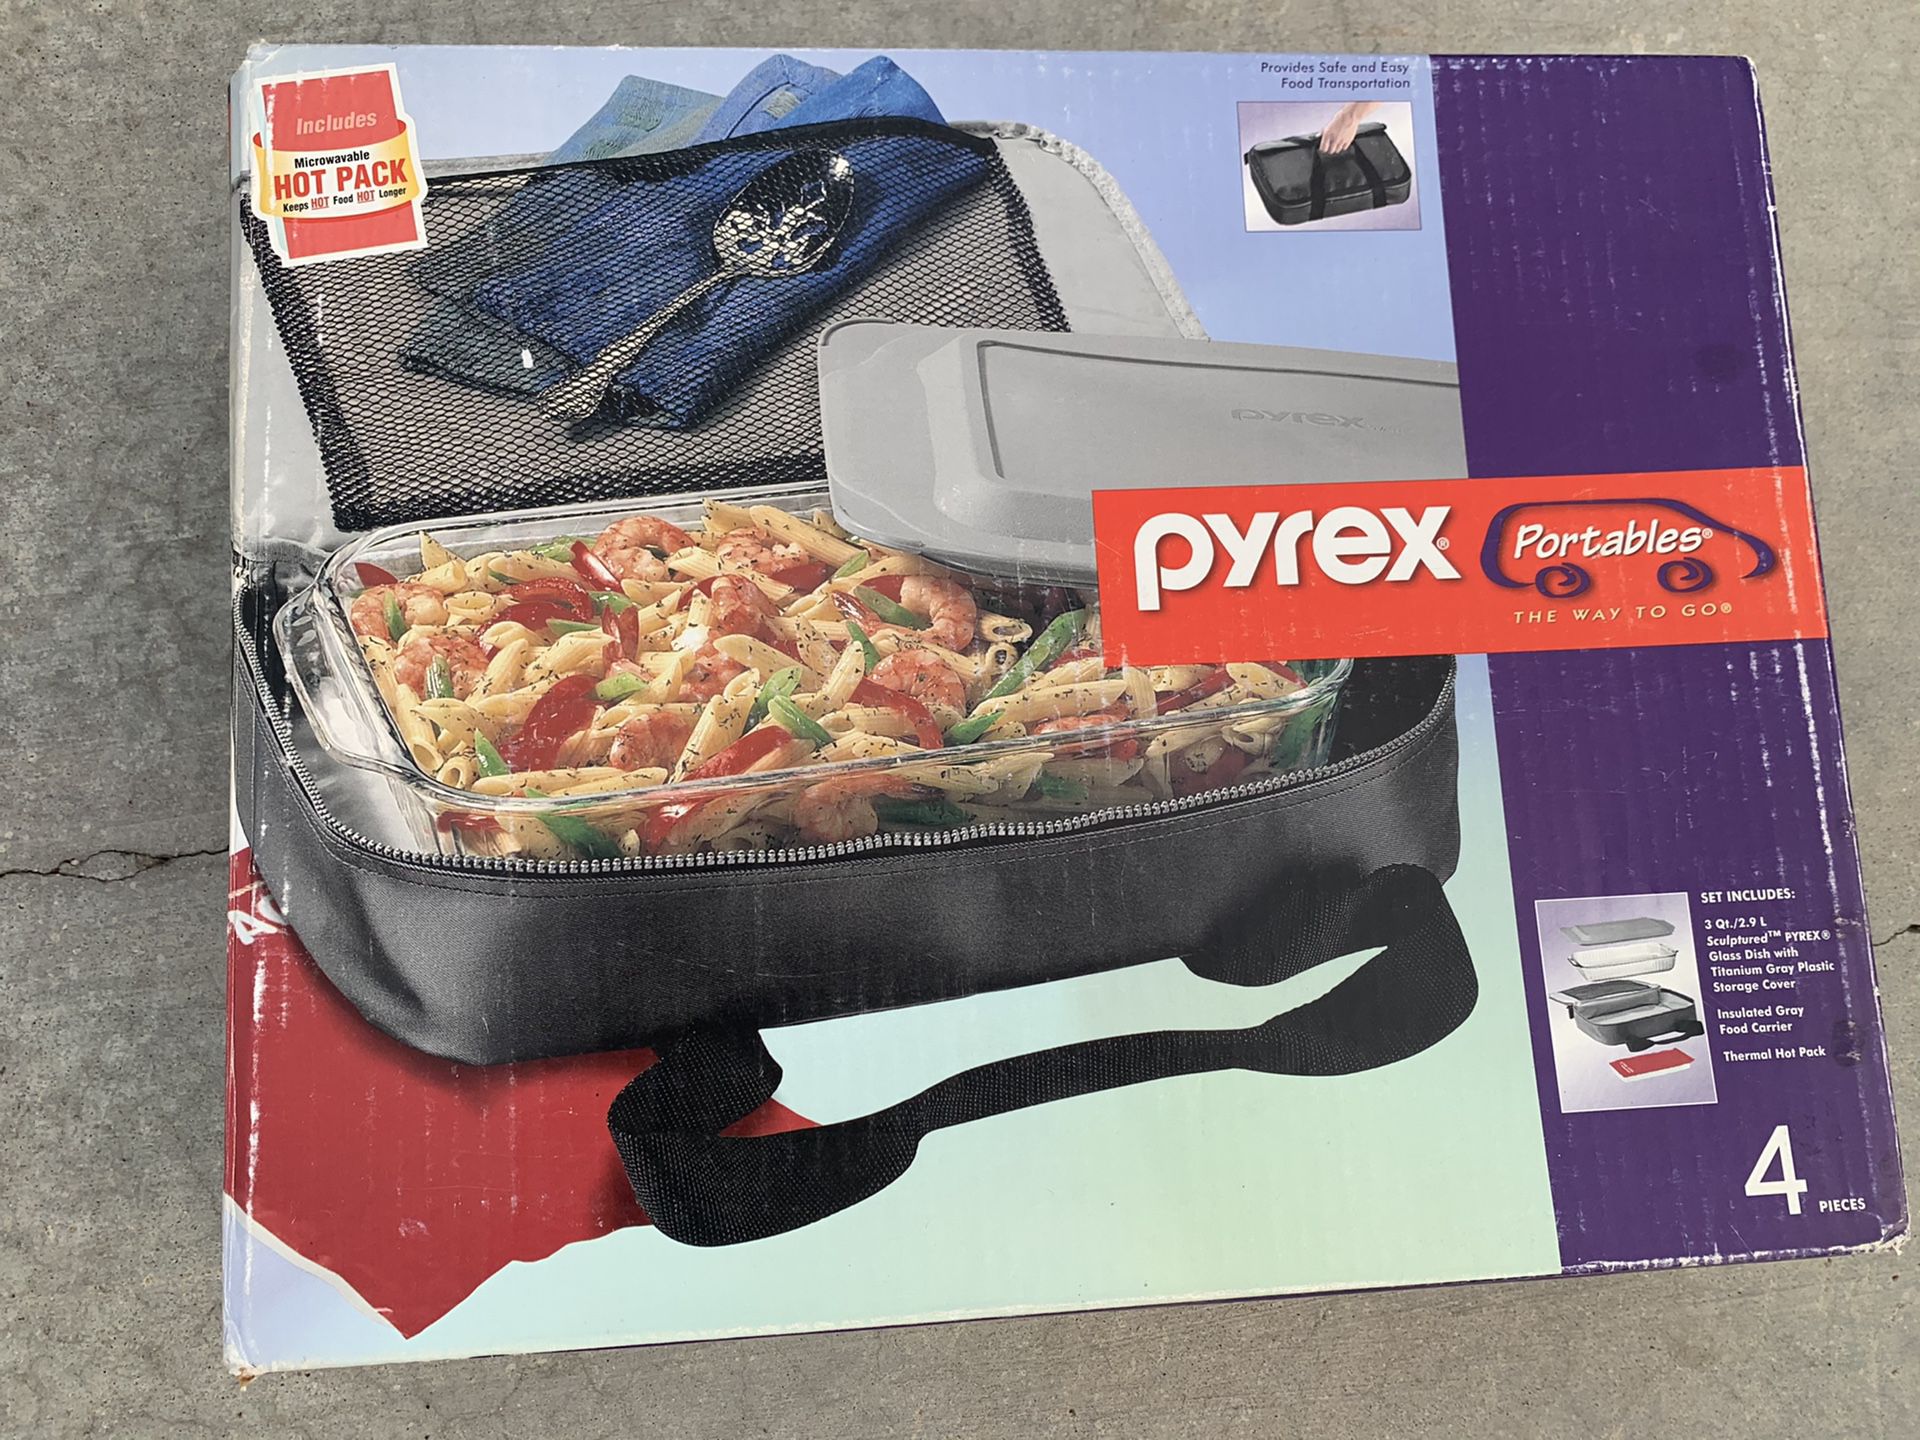 Portable Pyrex casserole dish and cover